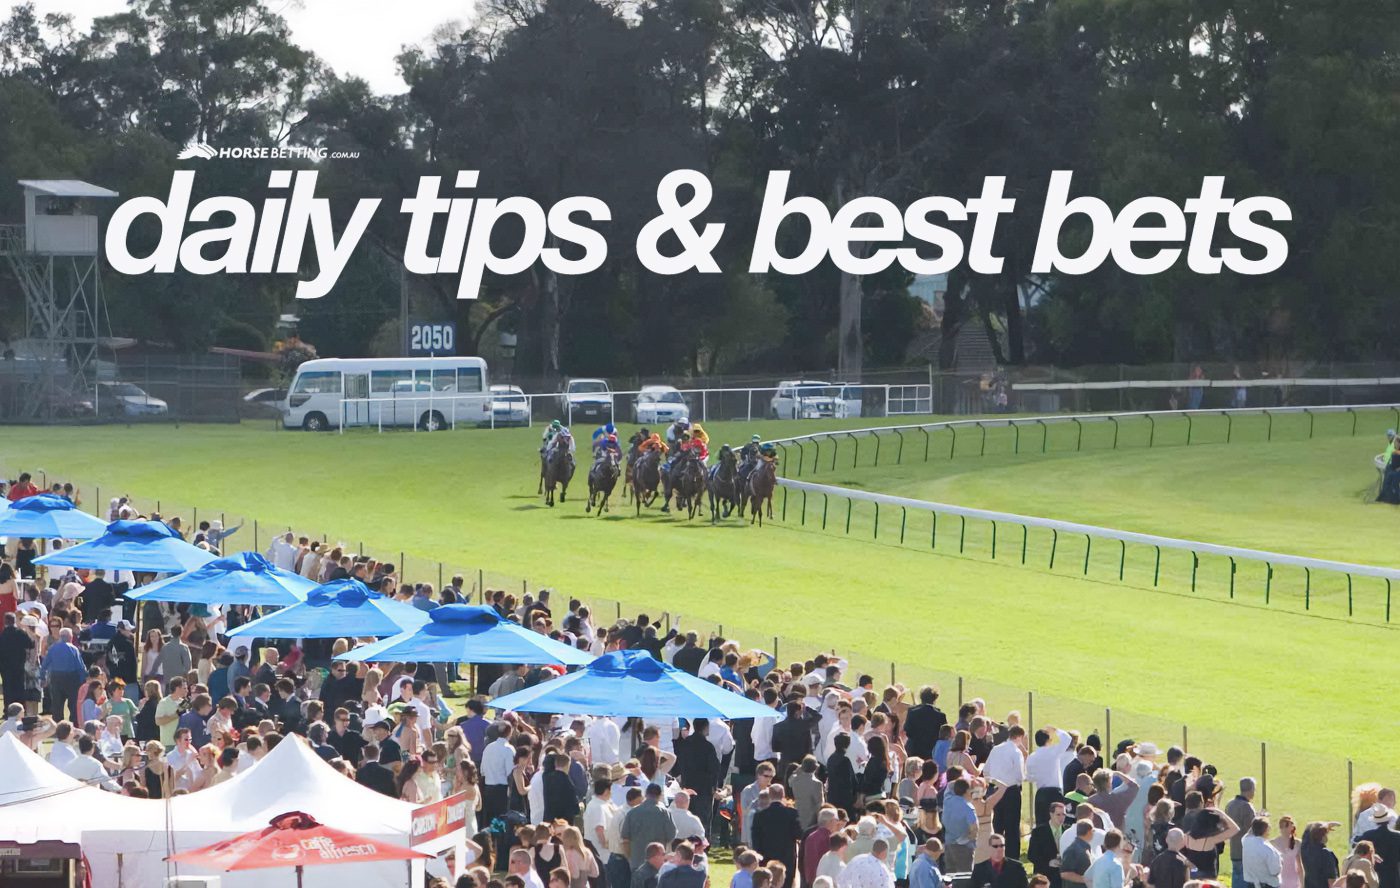 Tuesday horse racing tips & best bets